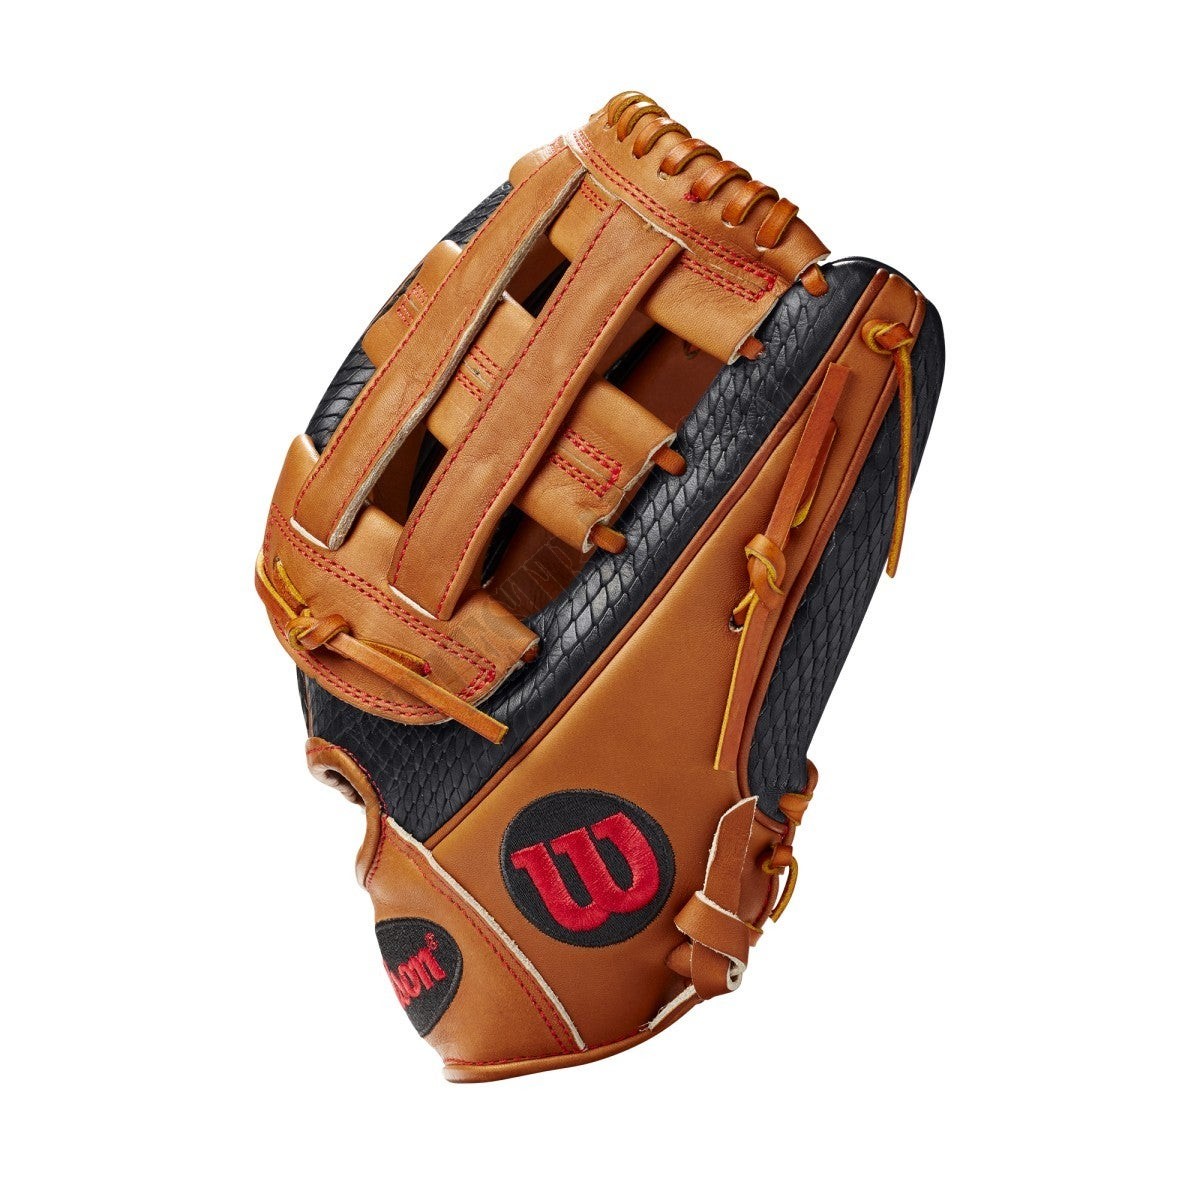 2021 A2000 DW5 12" Infield Baseball Glove -  Limited Edition ● Wilson Promotions - -3